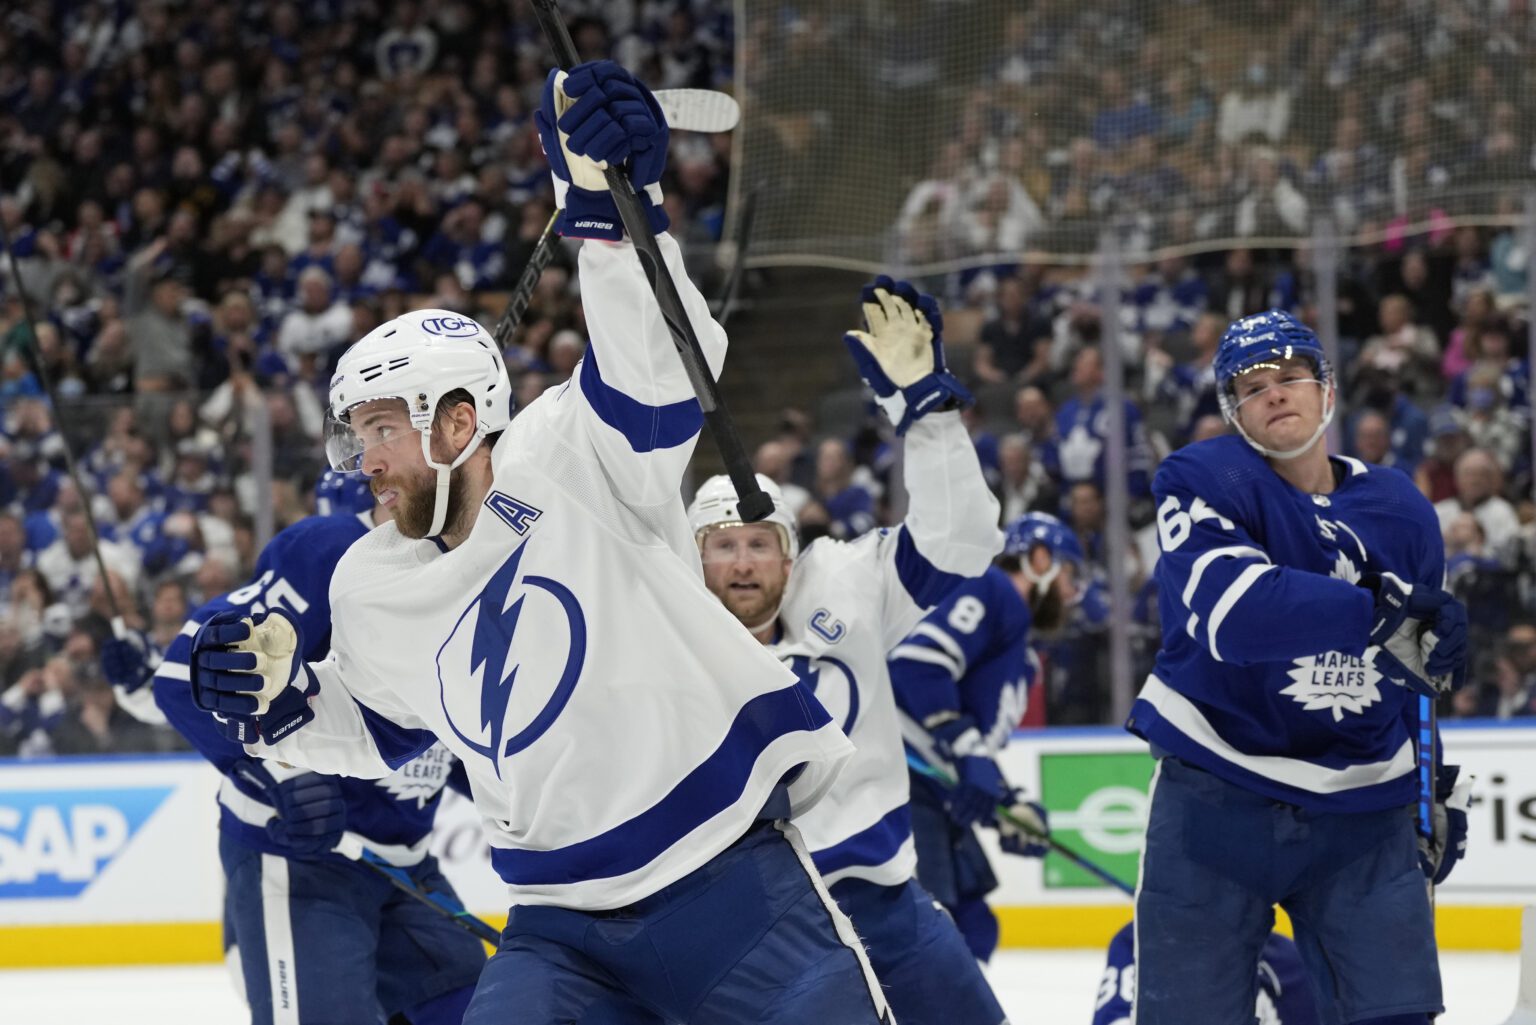 Tampa Bay Lightning defenseman Victor Hedman (77) celebrates his goal against the Toronto Maple Leafs with center Steven Stamkos (91) during the first period of Game 2 of an NHL hockey Stanley Cup playoffs first-round series Wednesday